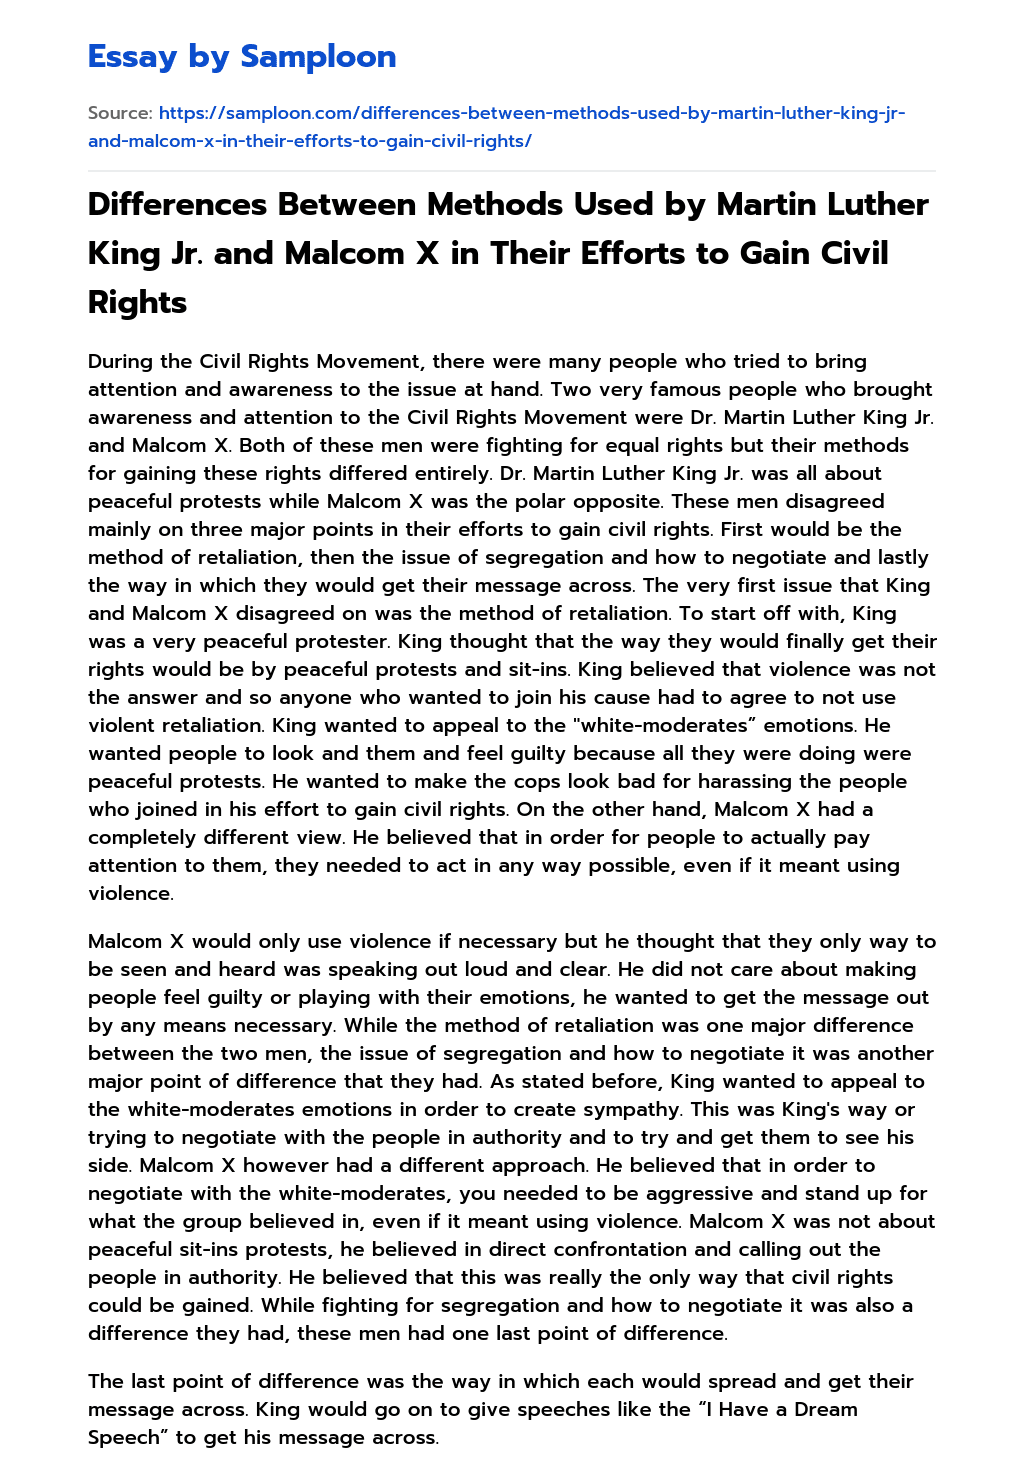 Differences Between Methods Used by Martin Luther King Jr. and Malcom X in Their Efforts to Gain Civil Rights essay